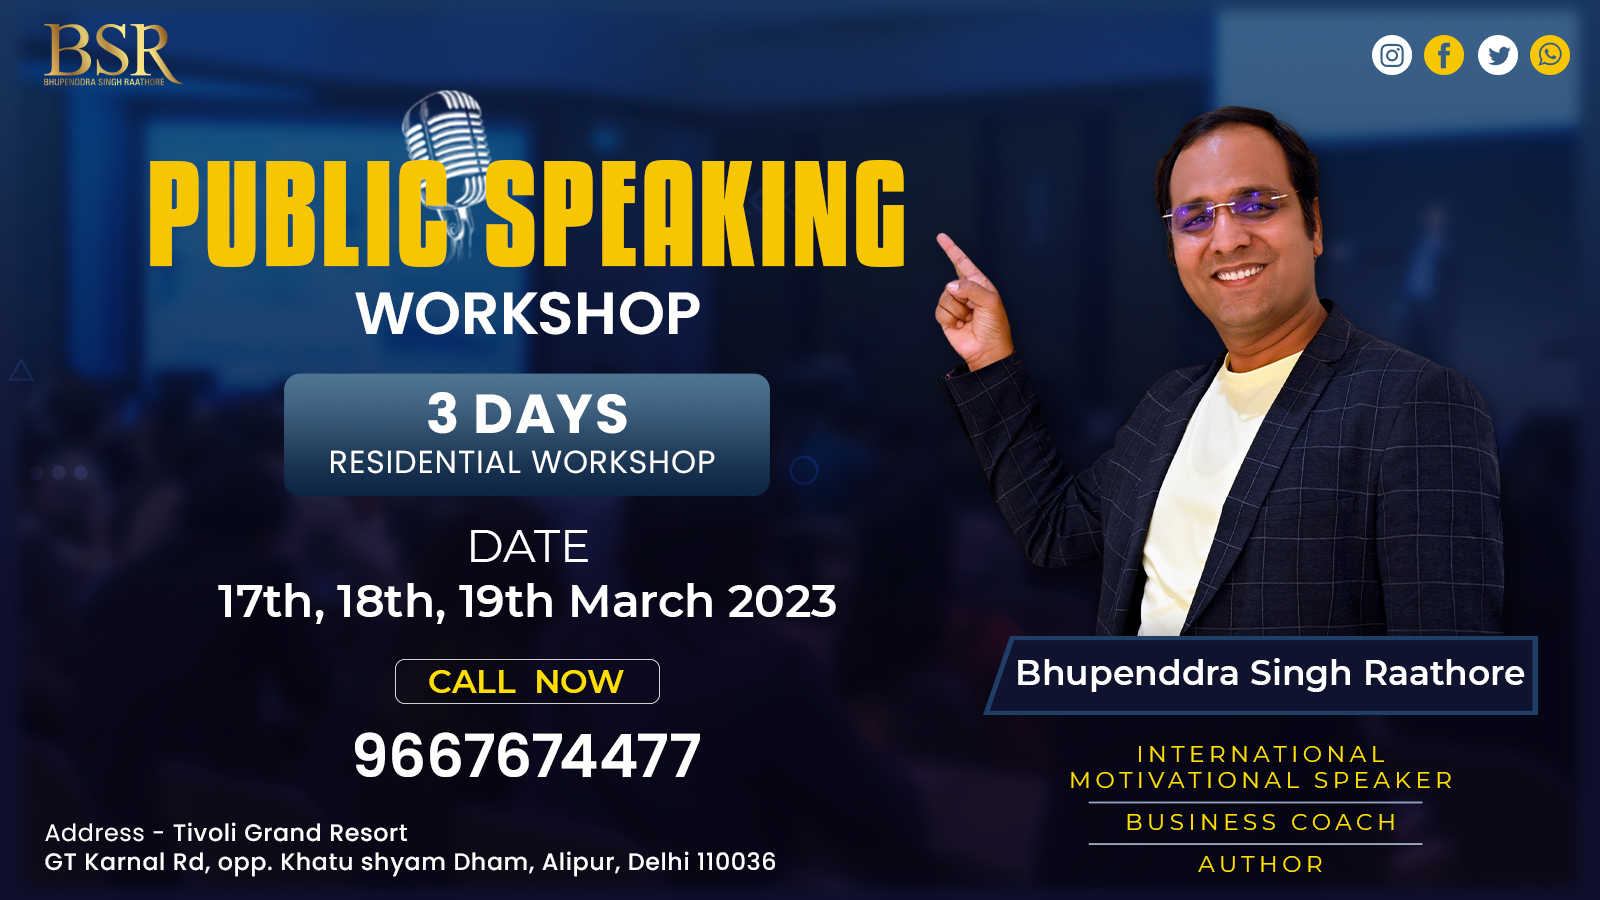 Empower Yourself & Become A POWERFUL SPEAKER by CoachBSR